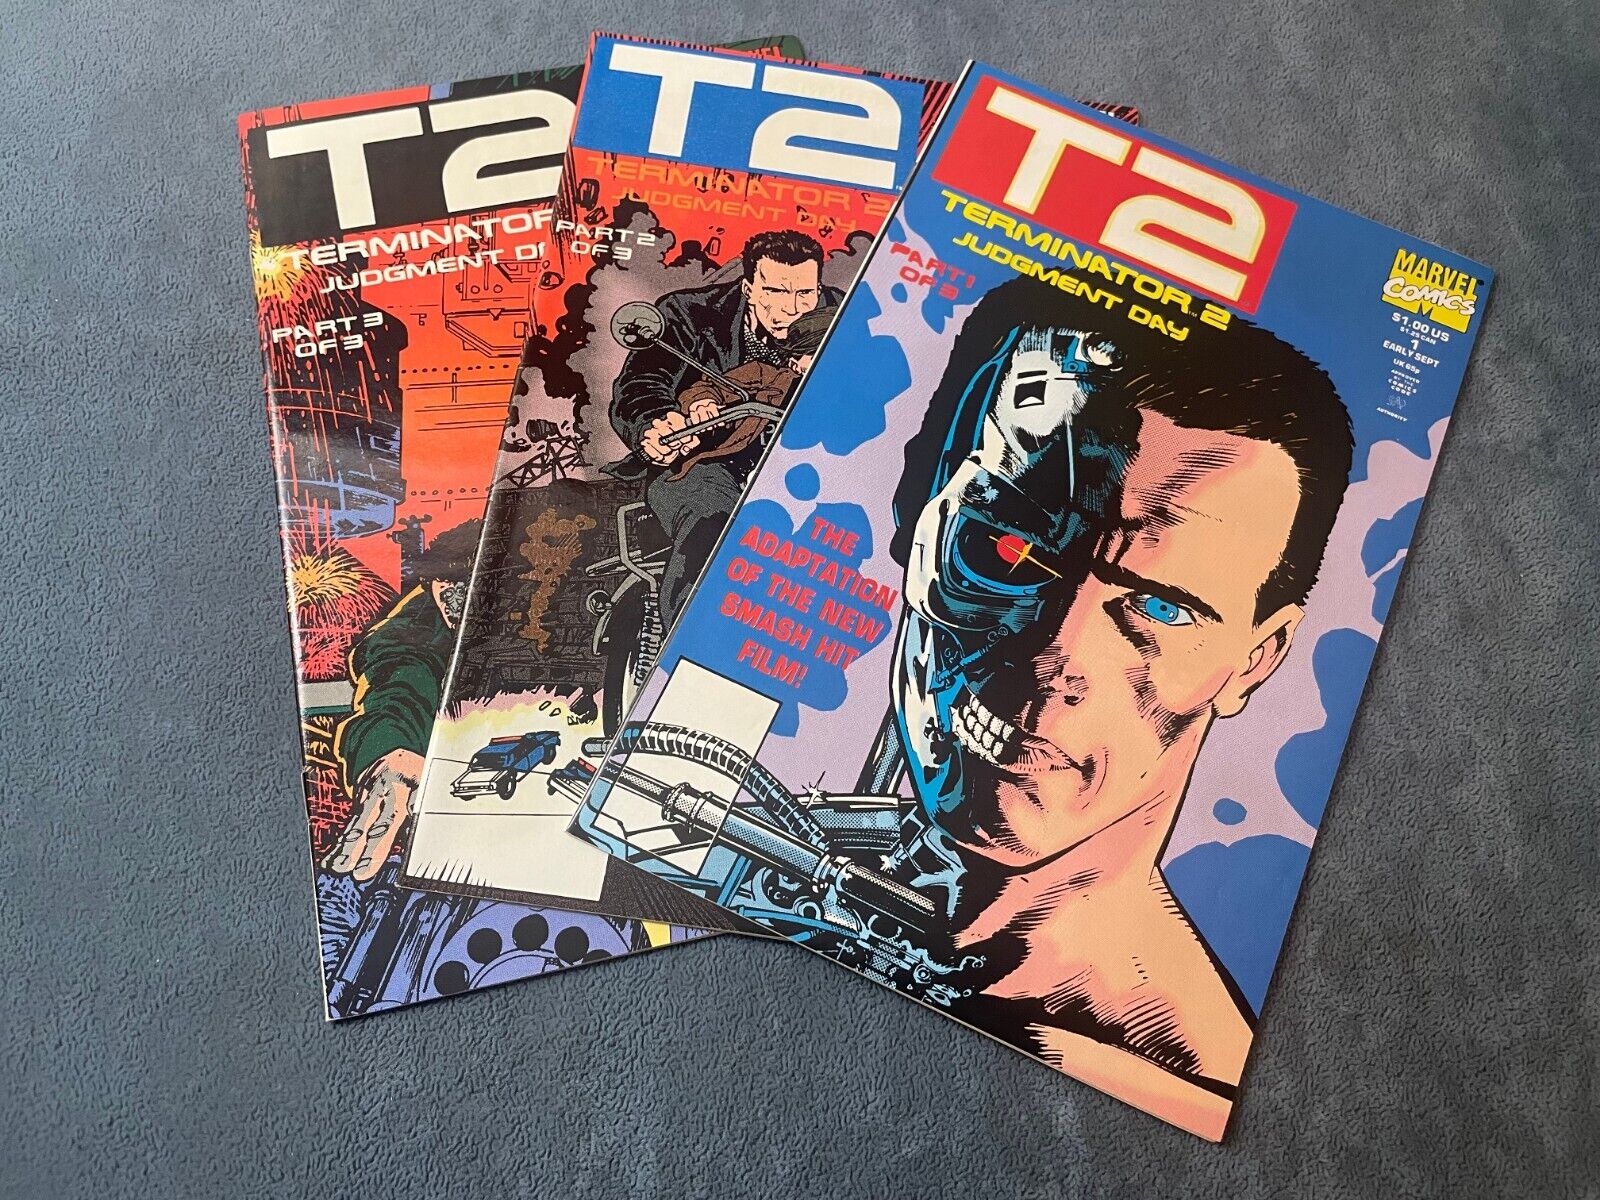 T2 Terminator 2 Judgment Day #1-3 1991 Marvel Comic Books Complete Series VF/NM